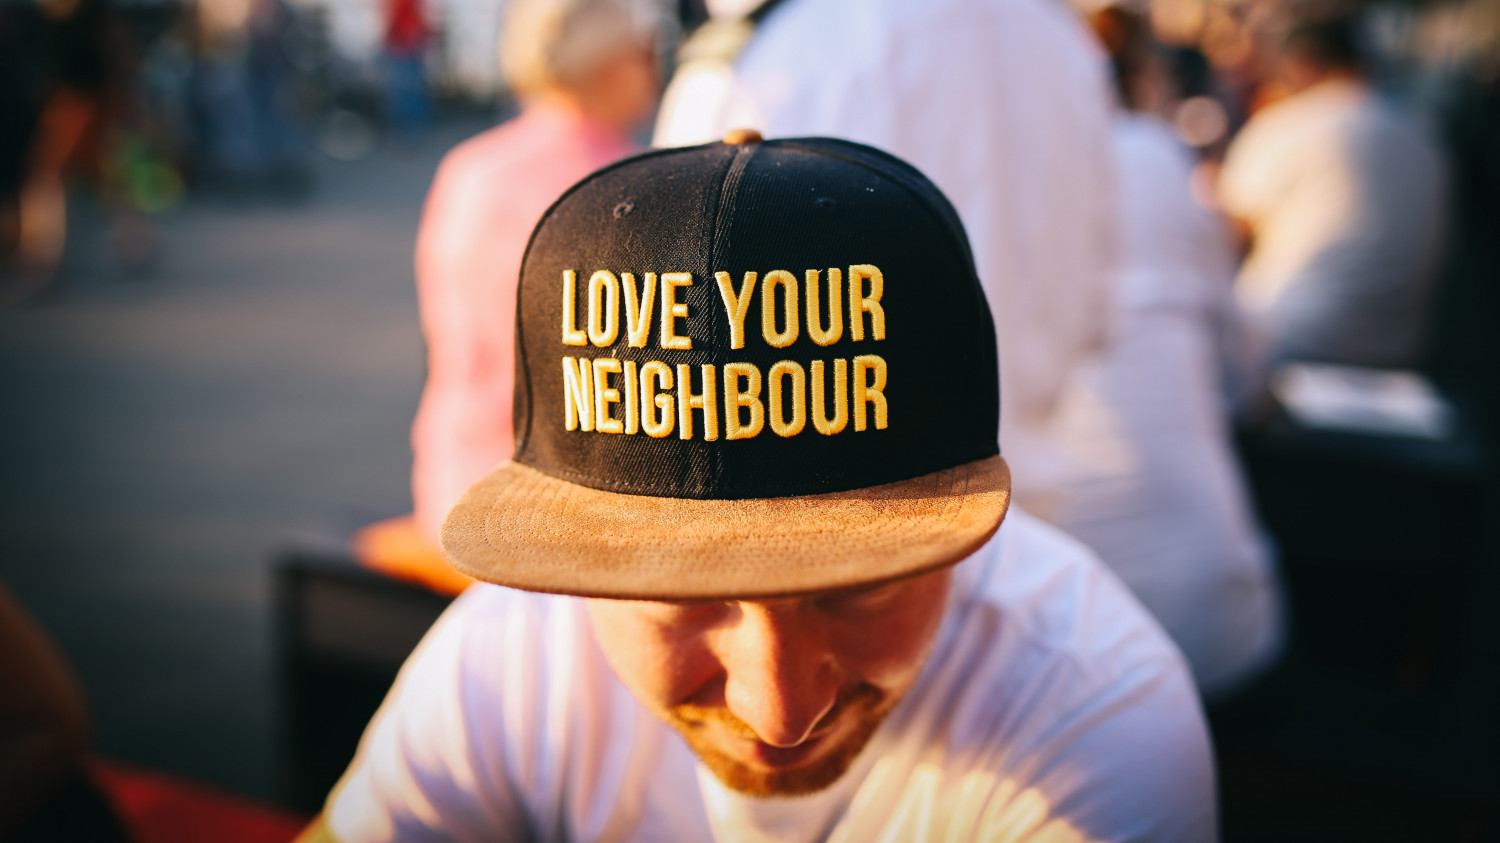 Image of a man wearing a baseball reading "Love you neighbour"